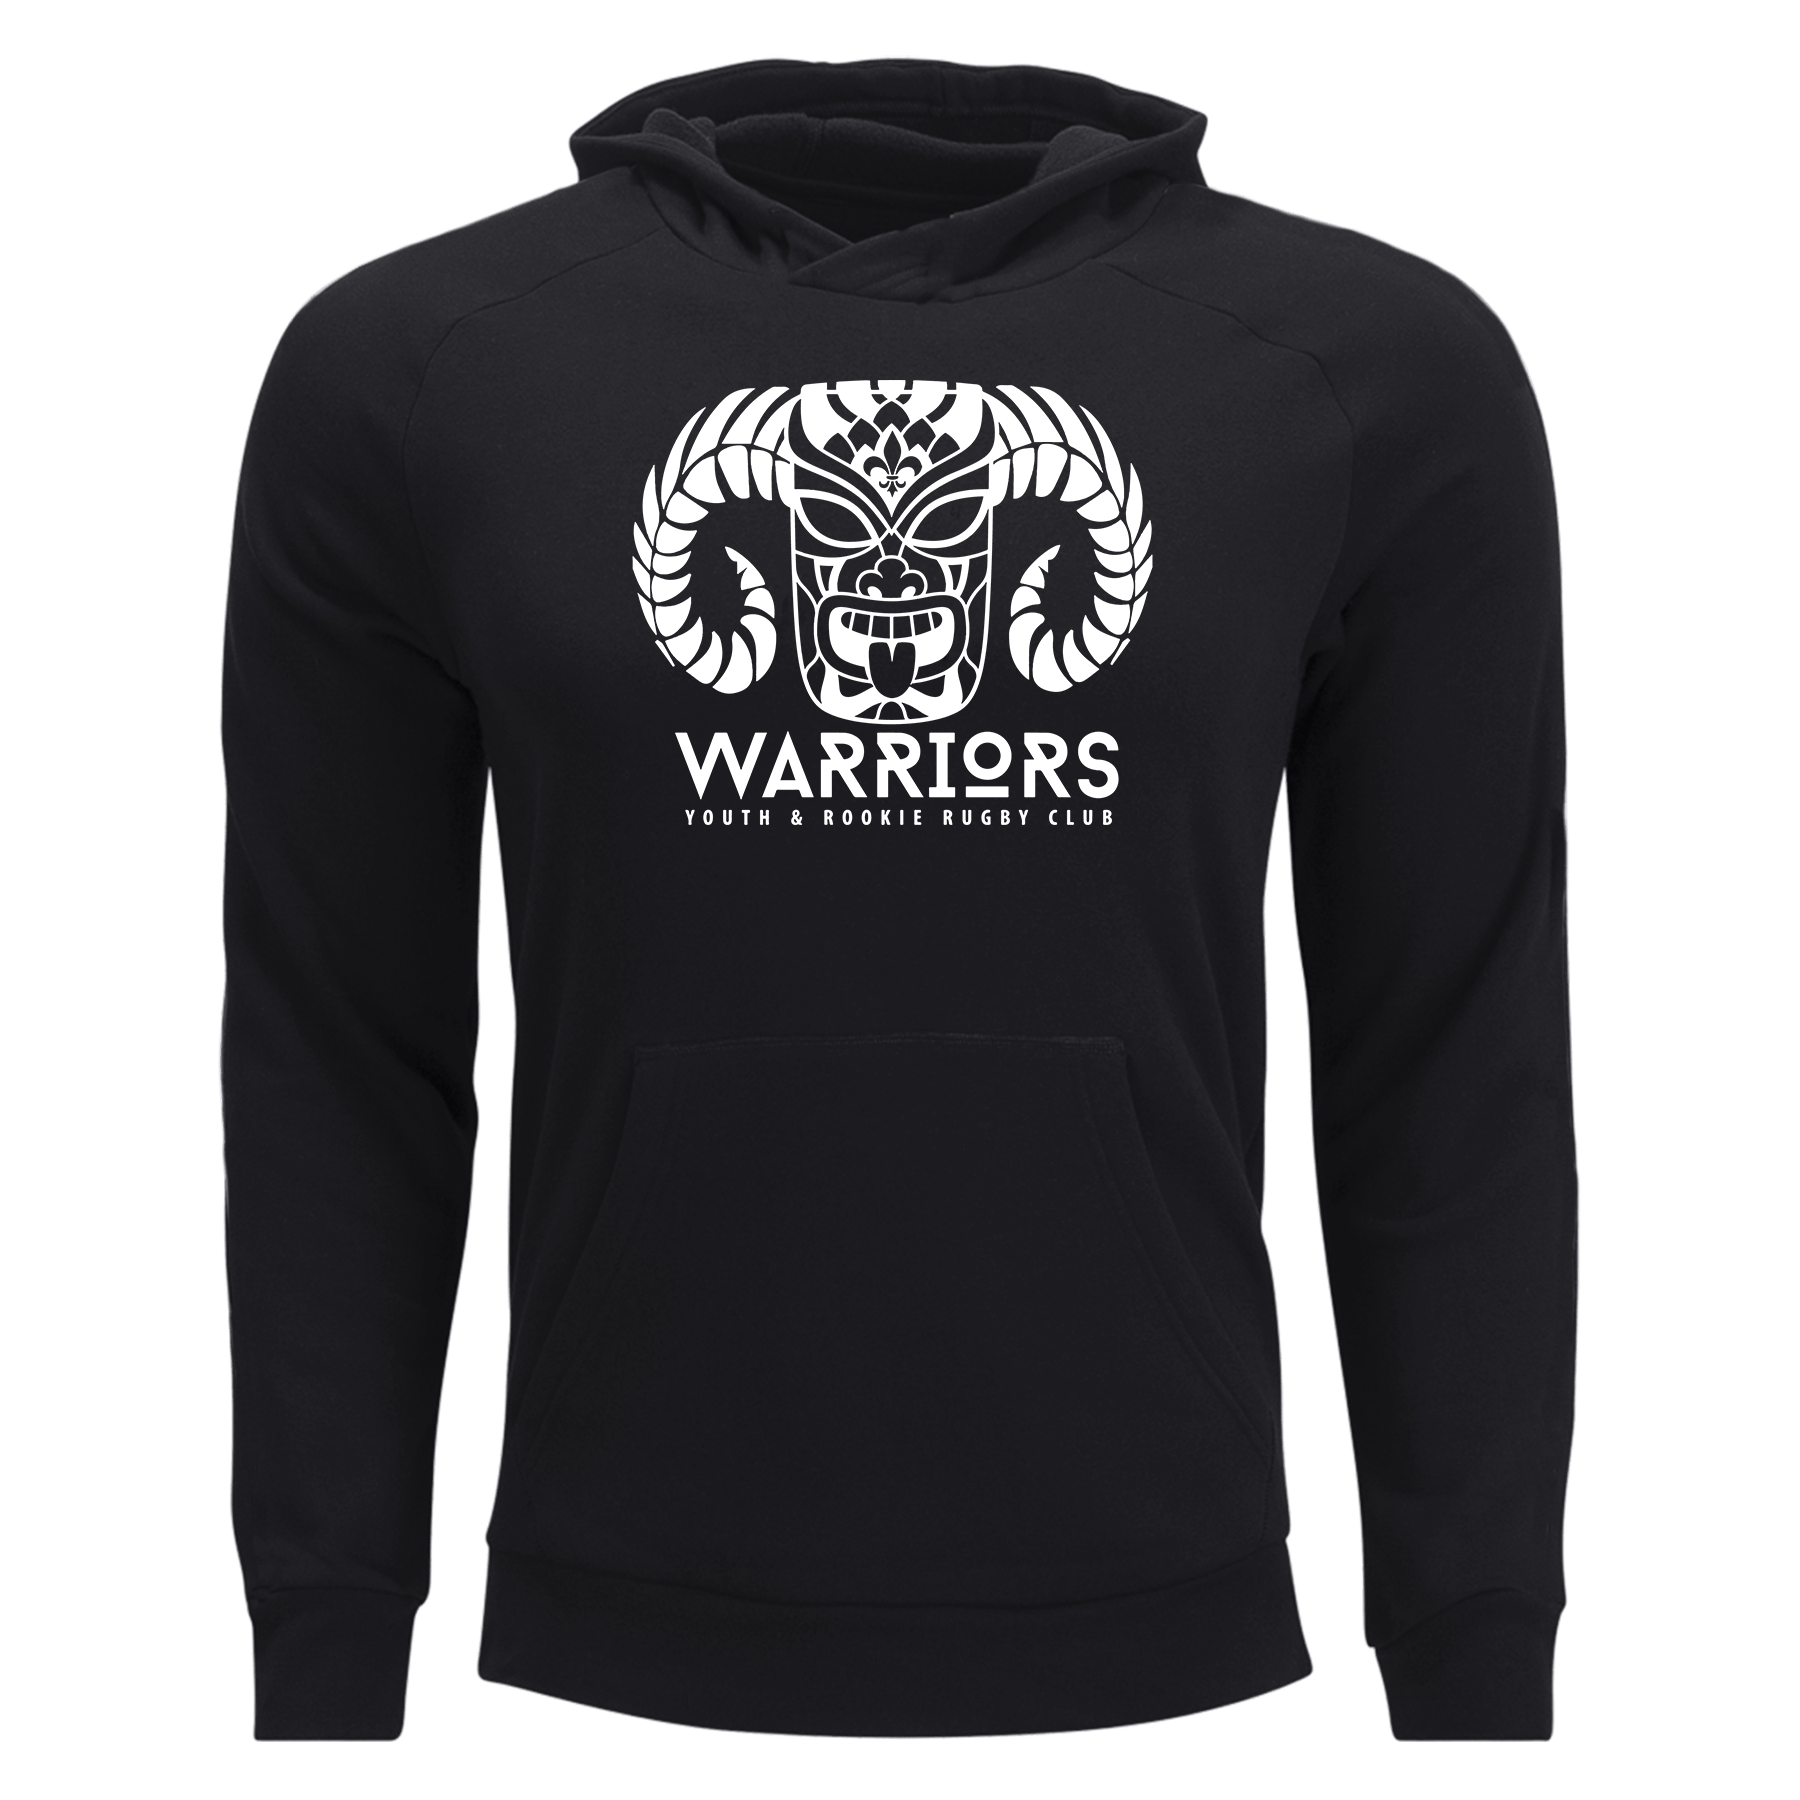 Warriors Youth & Rookie Rugby Club Women's Cropped Hoodie - World